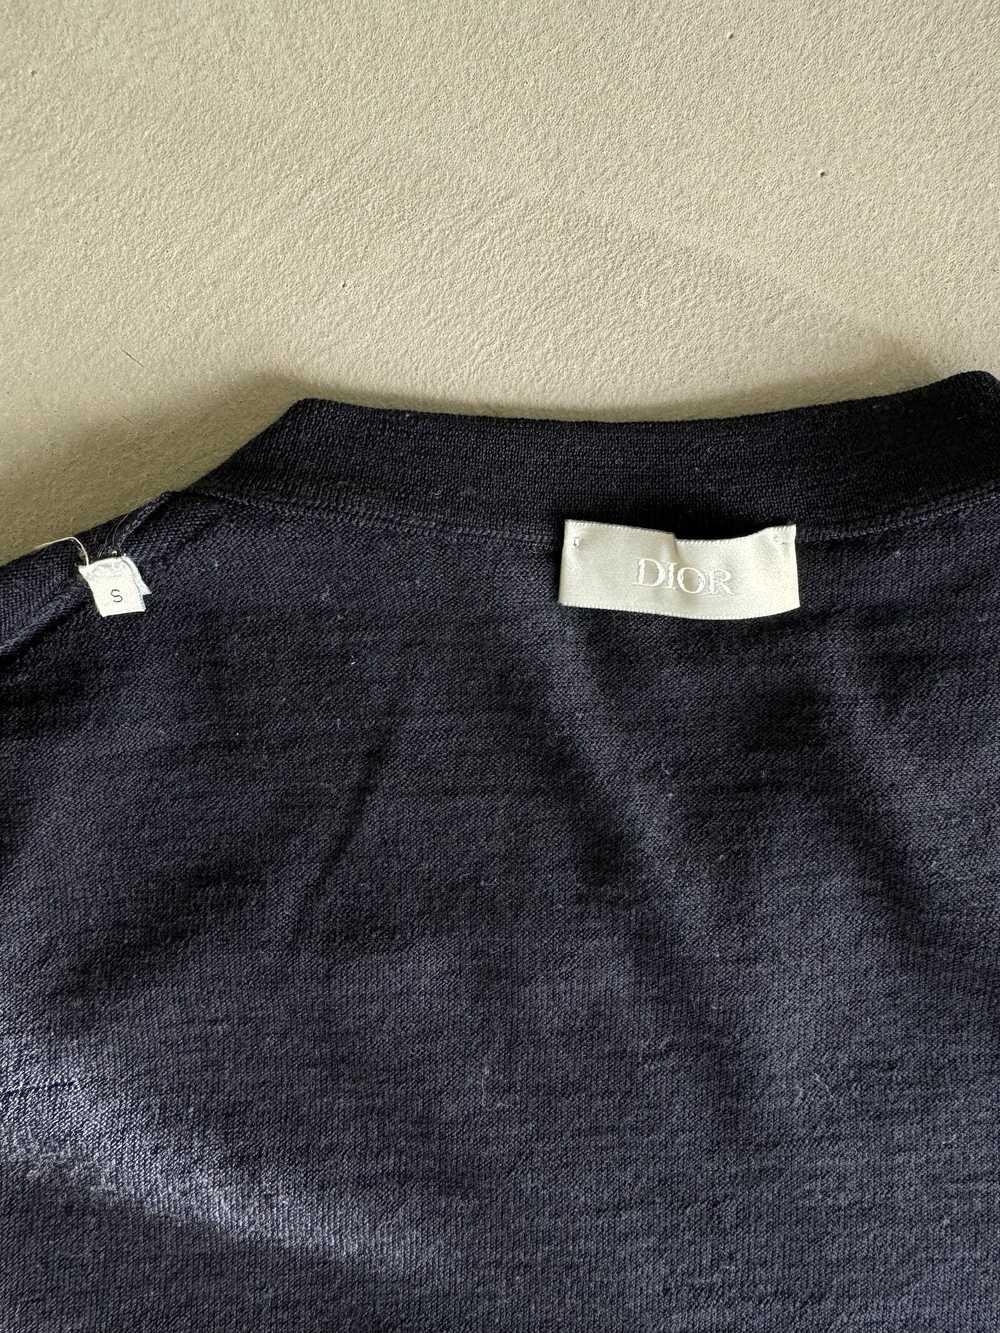 Dior Dior Homme Wool Knit Sweater, Navy - image 3